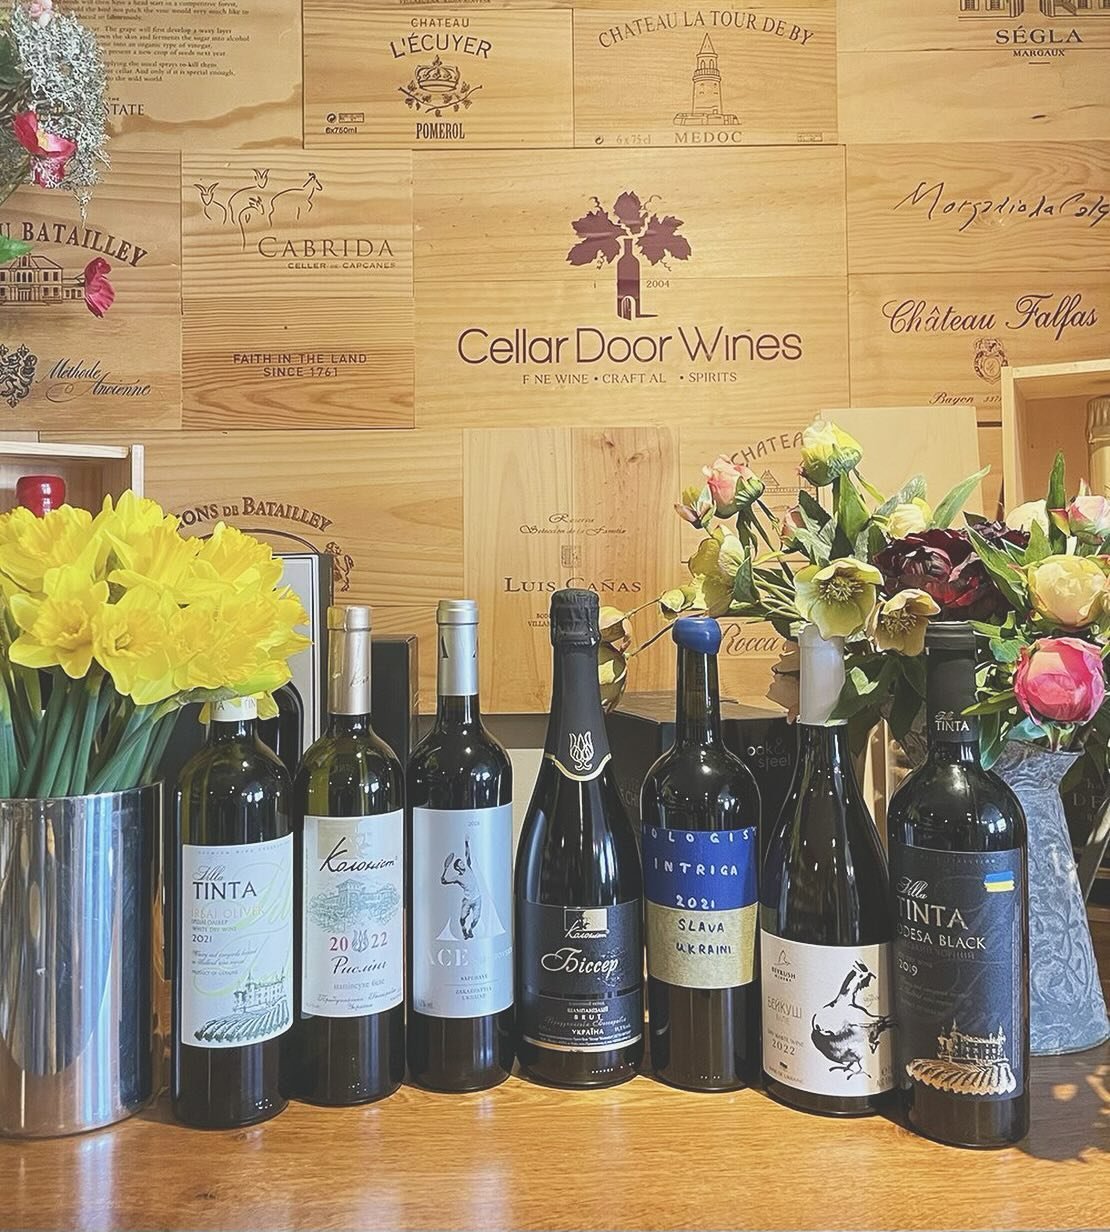 🍷Ukrainian Wine Tasting 🍷

@cellar_door_wines are delighted to be hosting a unique wine tasting at Cellar Door Wines with Ukrainian wine representative Tania Olevska on the 16th of May from 7.30 - 9.30pm. 
🍾
You will discover hidden gems from mult